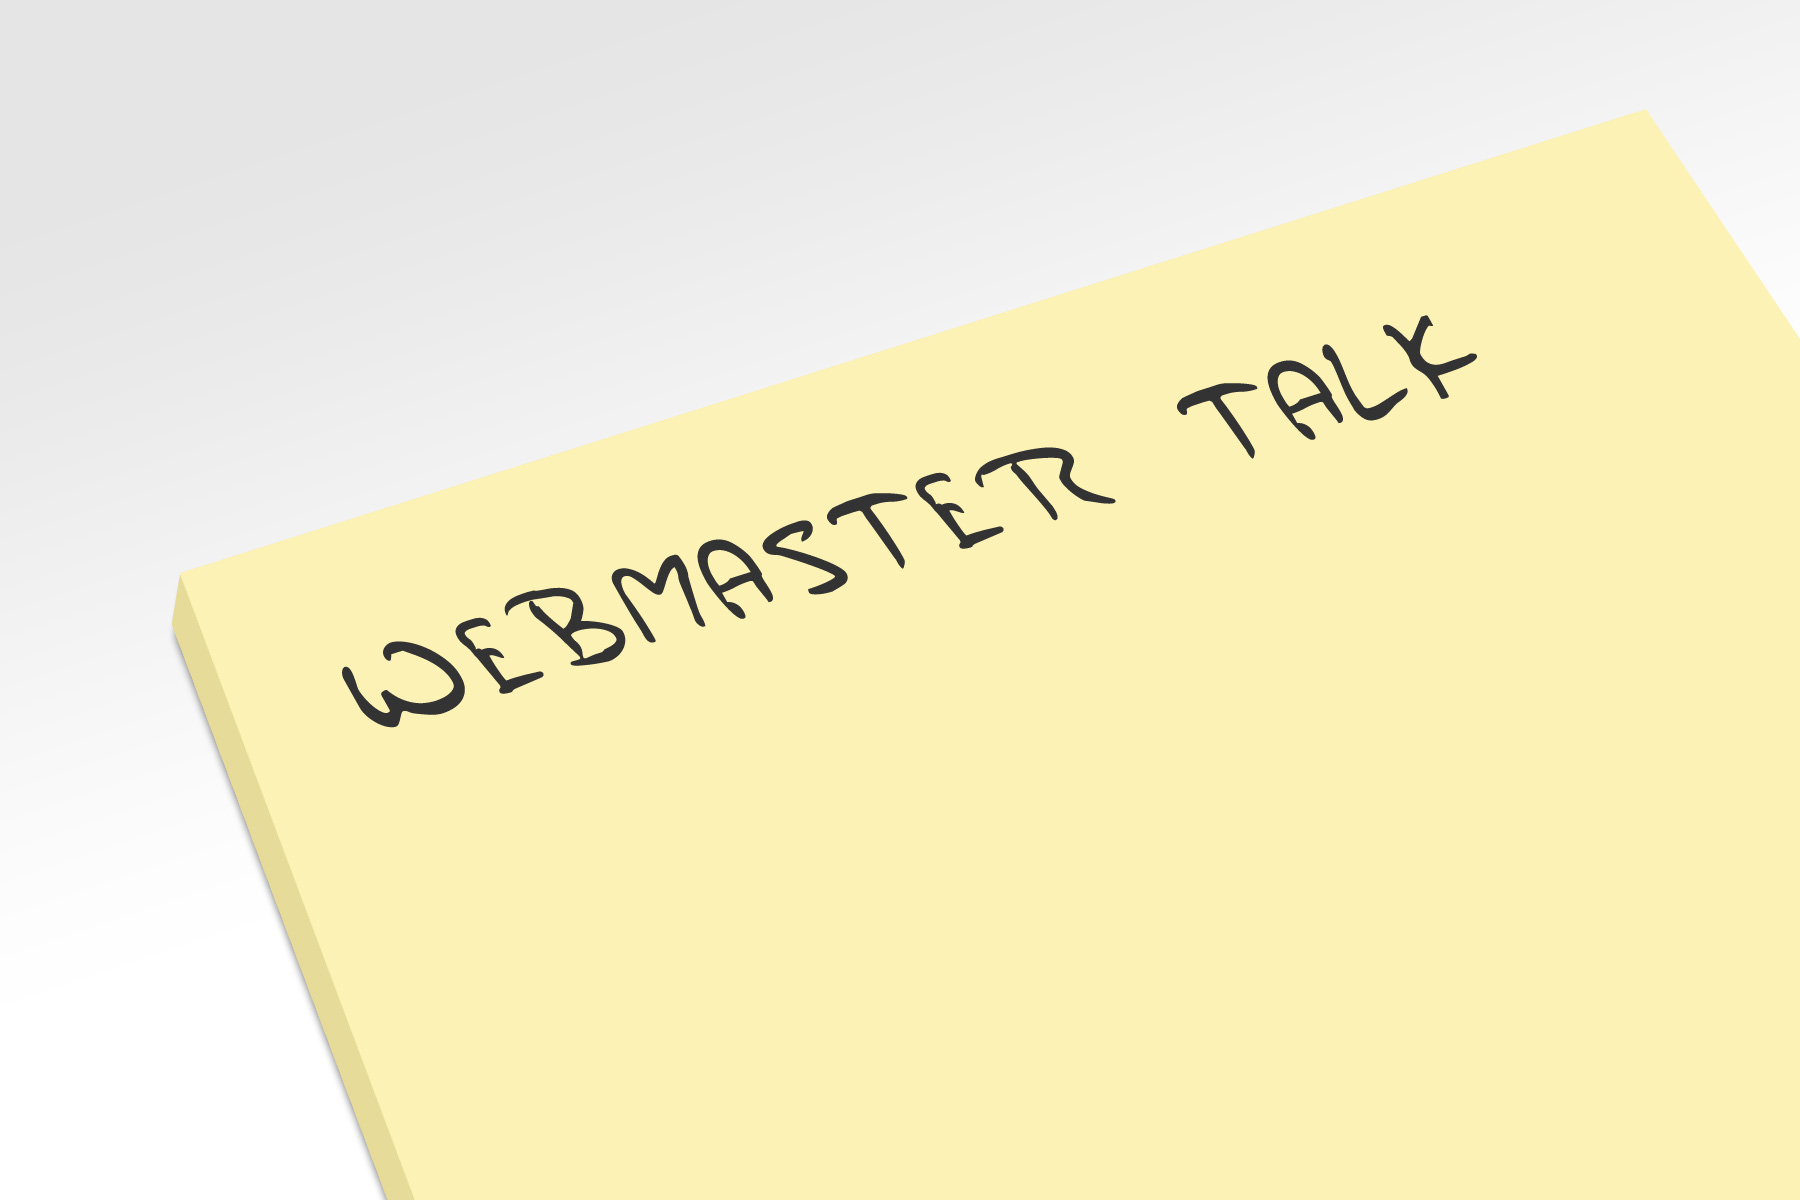 Post-it with webmaster talk